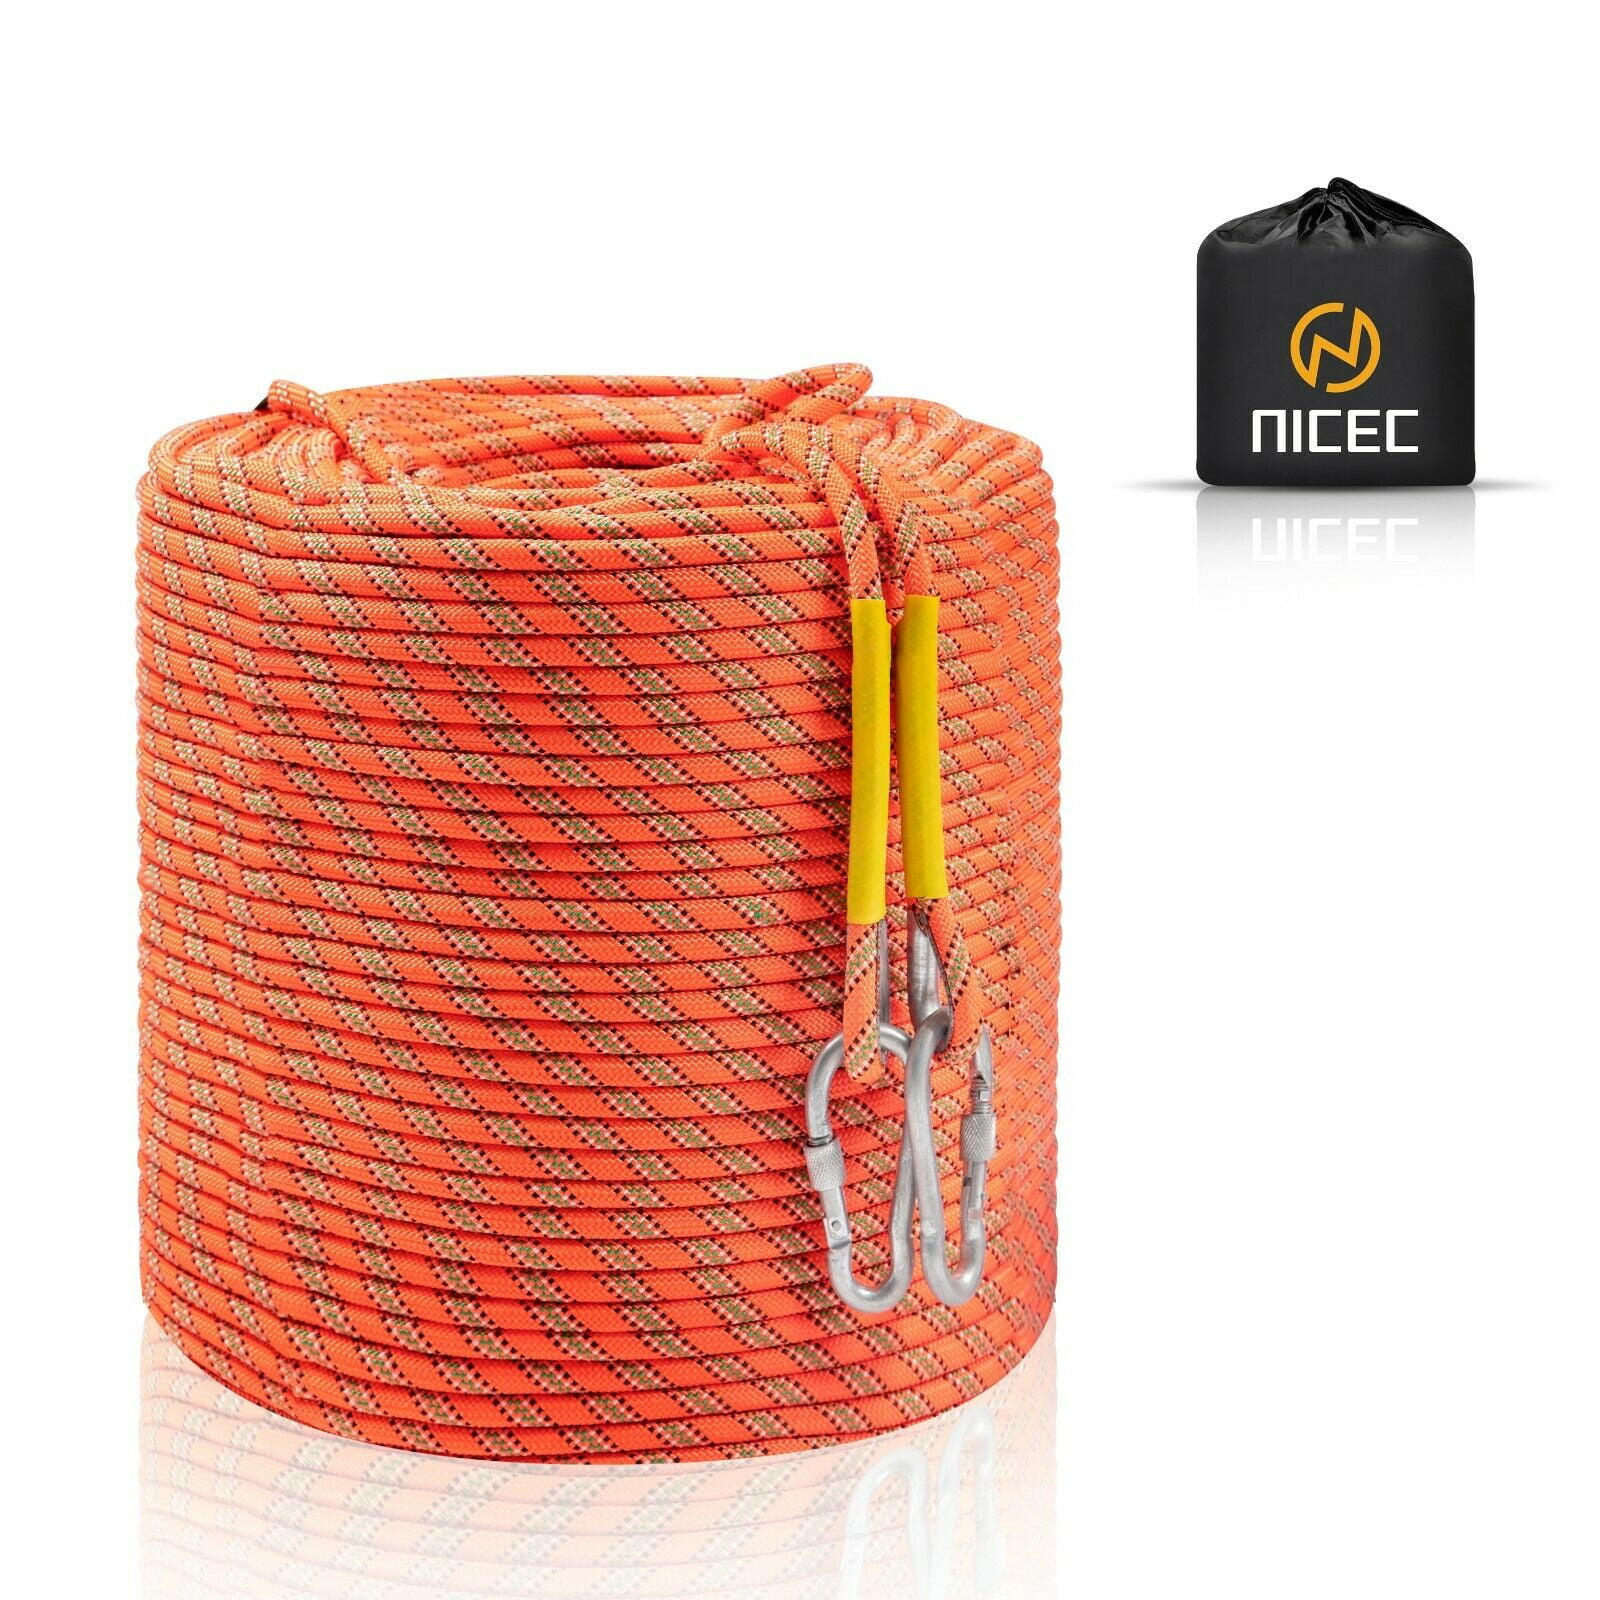 Escape Rope Climbing Equipment 10mm 32ft/64ft/96ft/160ft/230ft/500ft/985ft/1000ft with Carry Bag Rescue Rope Static Rock-Climbing Rope Nice C Climbing Rope